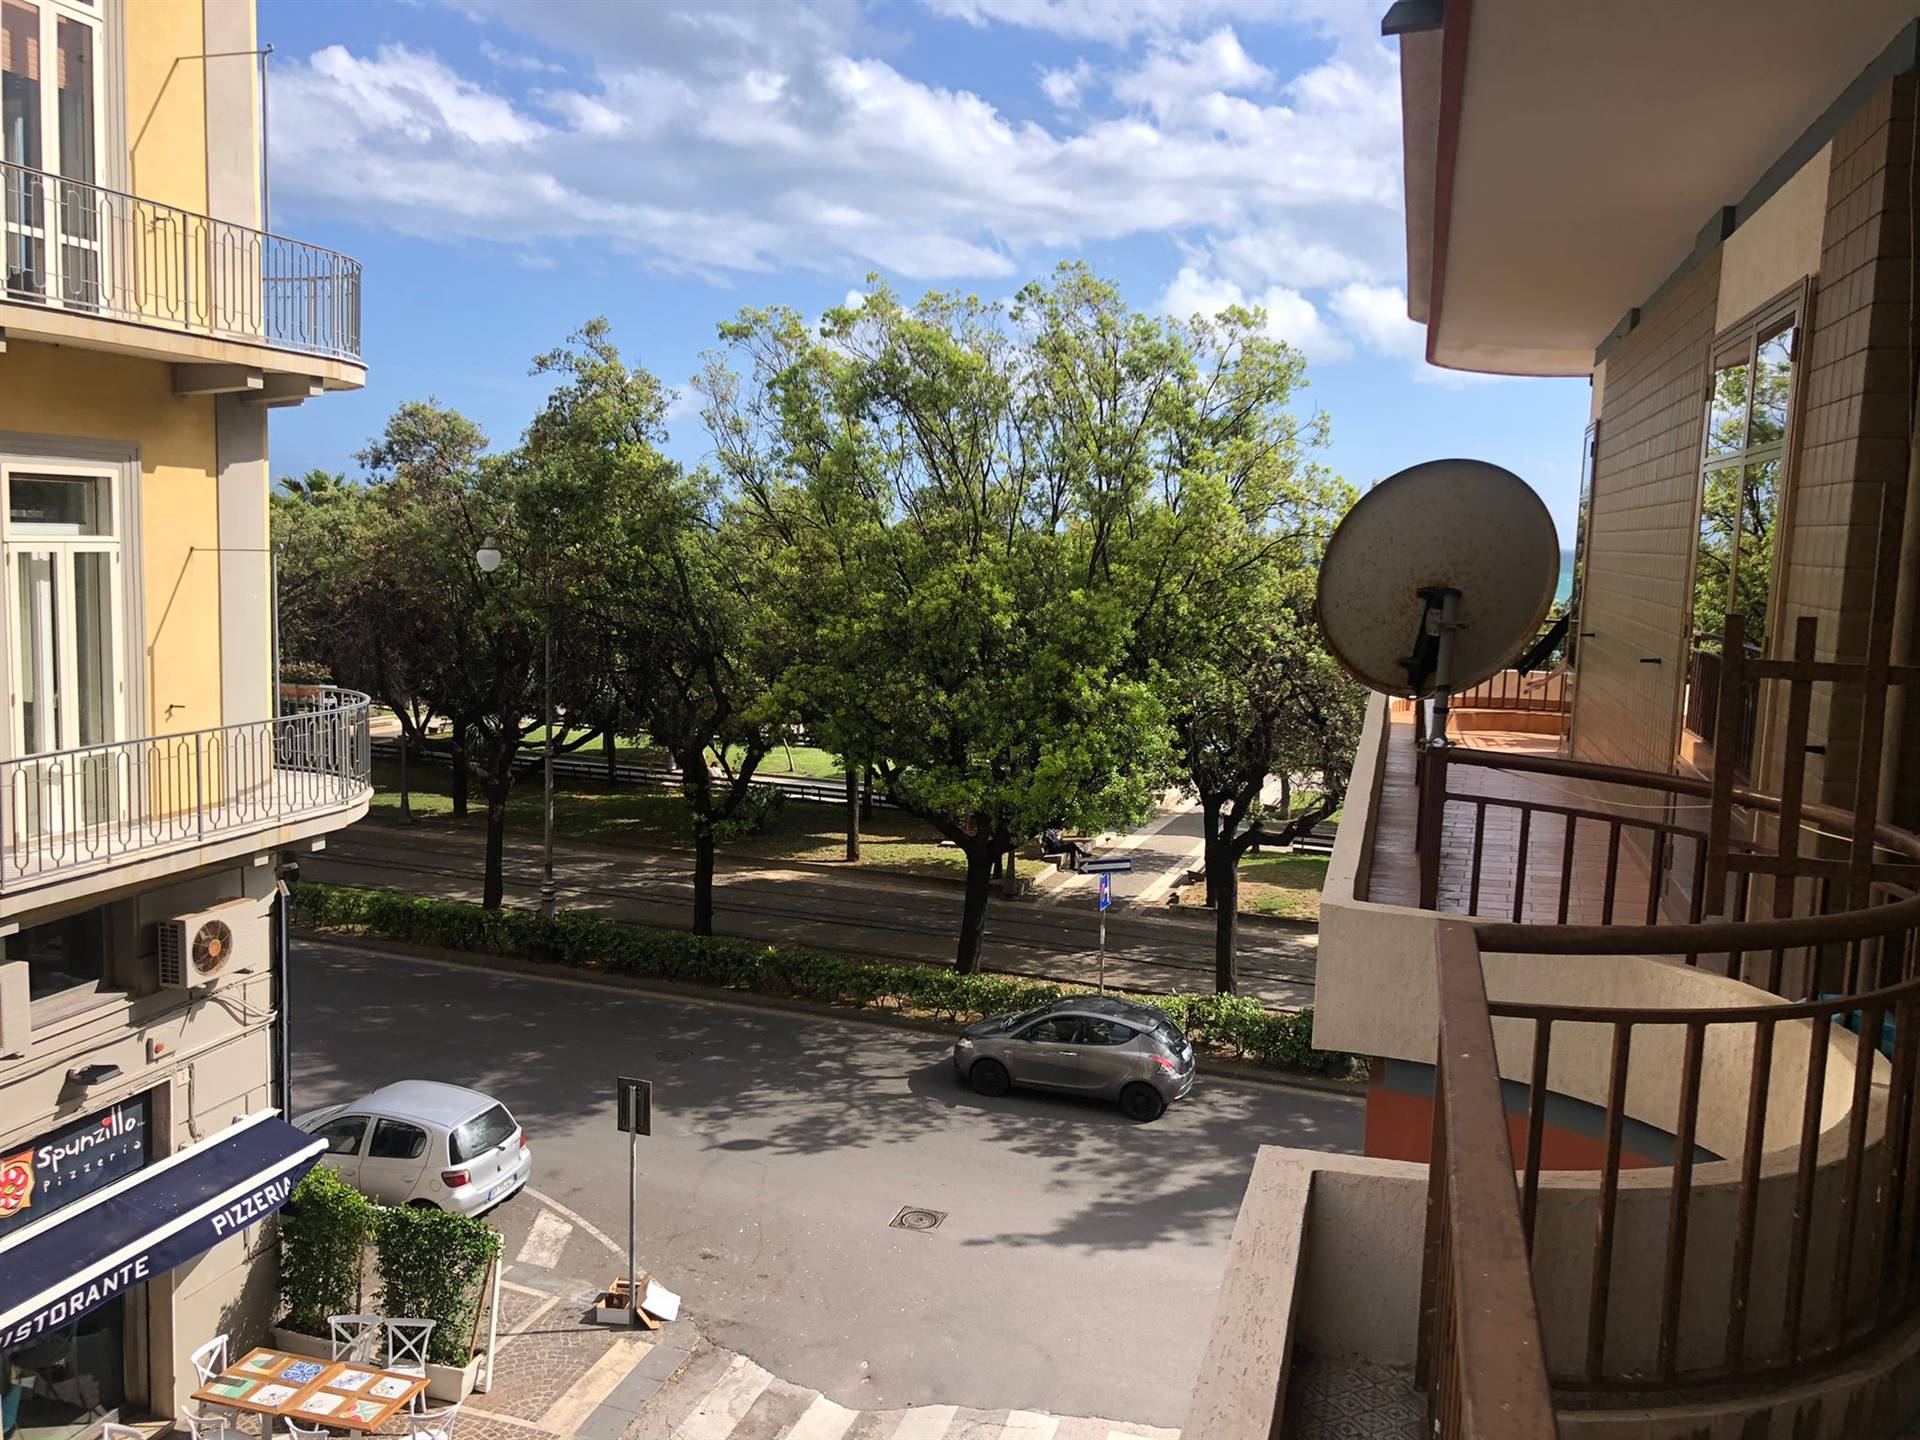 CENTRO, SALERNO, Apartment for rent, Heating Individual heating system, Energetic class: G, composed by: 2 Rooms, 2 Bedrooms, 1 Bathroom, Elevator, 